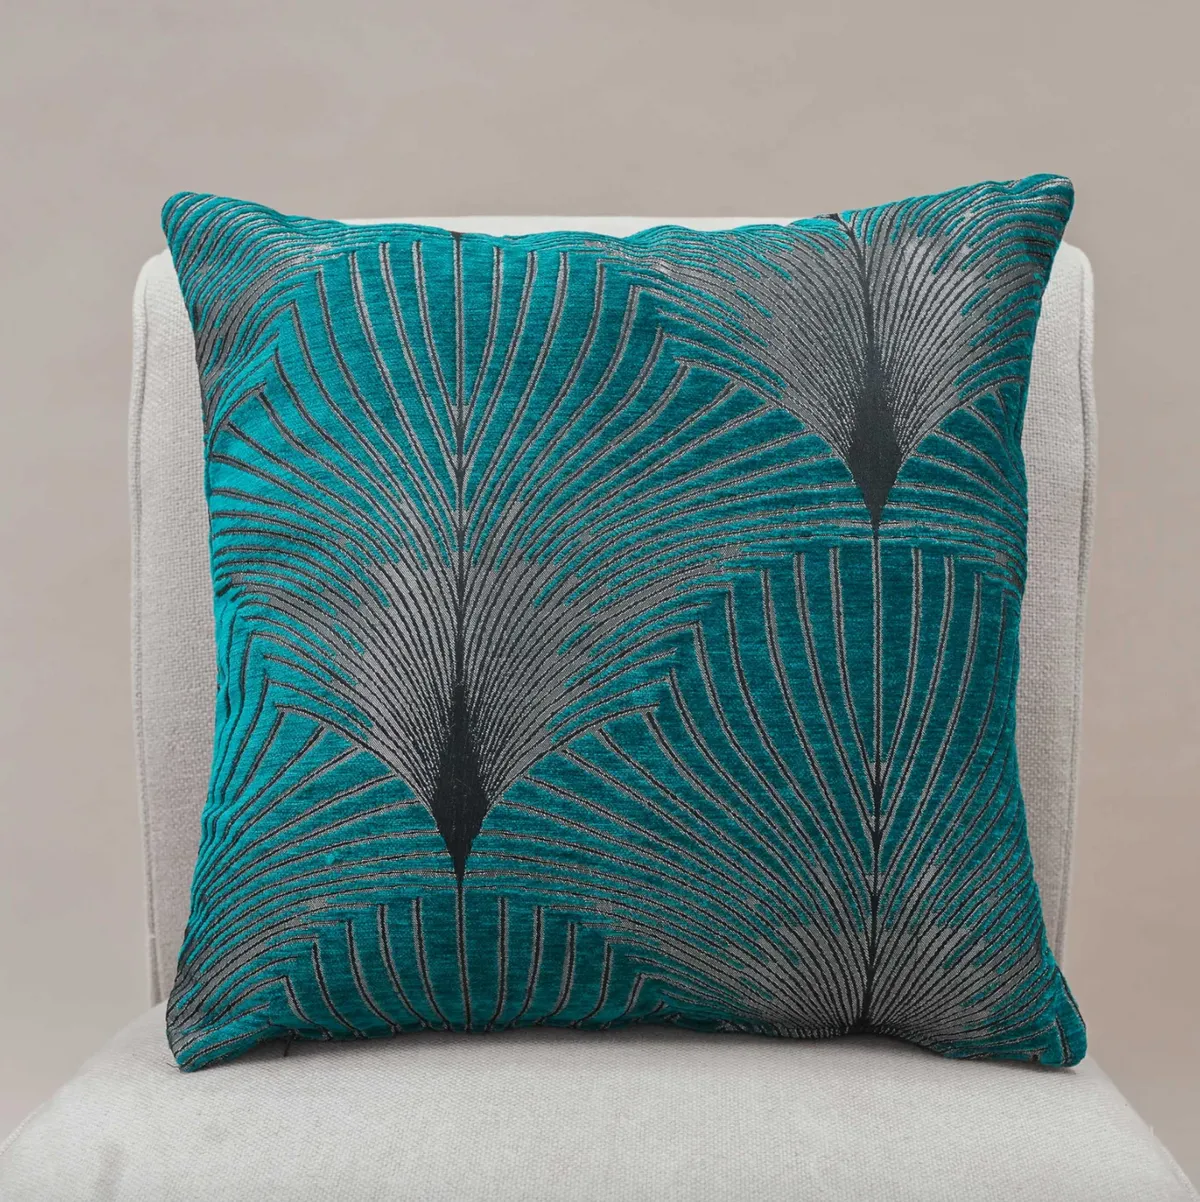 Teal and grey cushions